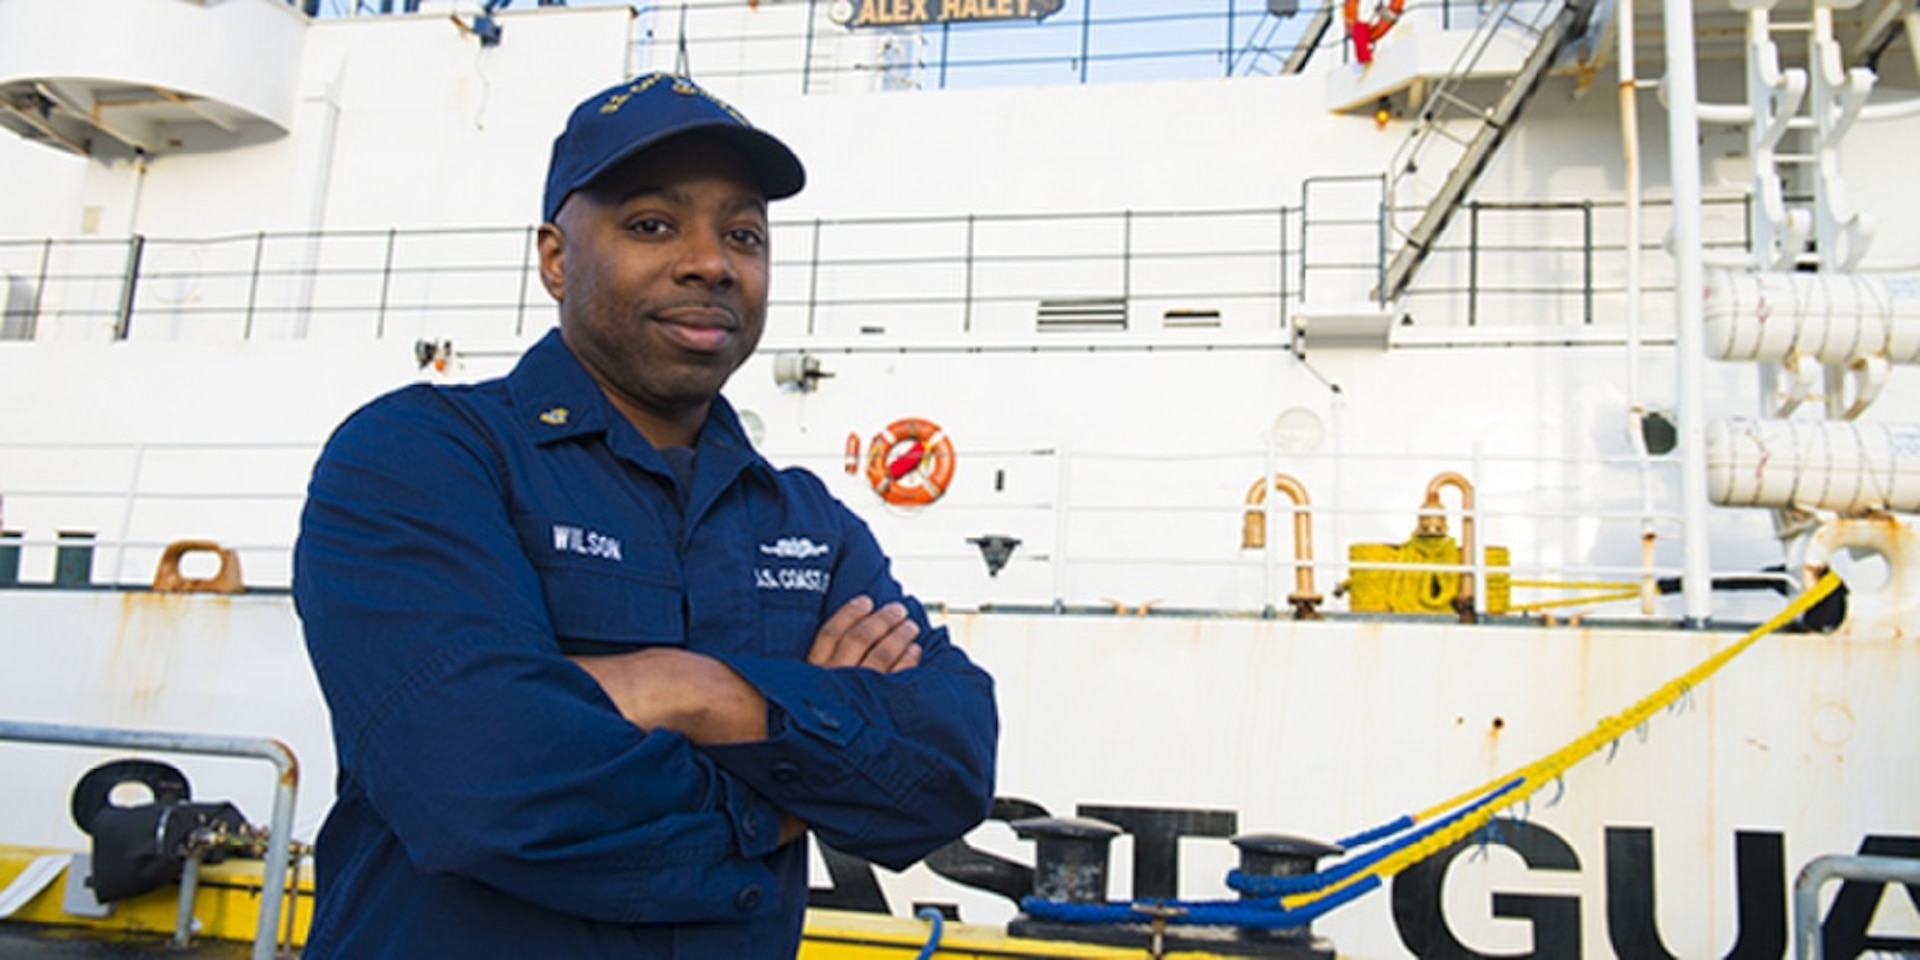 Chief Petty Officer Spencer Wilson pauses for a photo by Coast Guard Cutter Alex Haley in Kodiak, Alaska, Feb. 13, 2015. Wilson, a damage controlman aboard the cutter, is a passionate believer in celebrating the positive influences and traditions that African Americans enrich our nation with. (U.S. Coast Guard photo by Petty Officer 2nd Class Diana Honings)